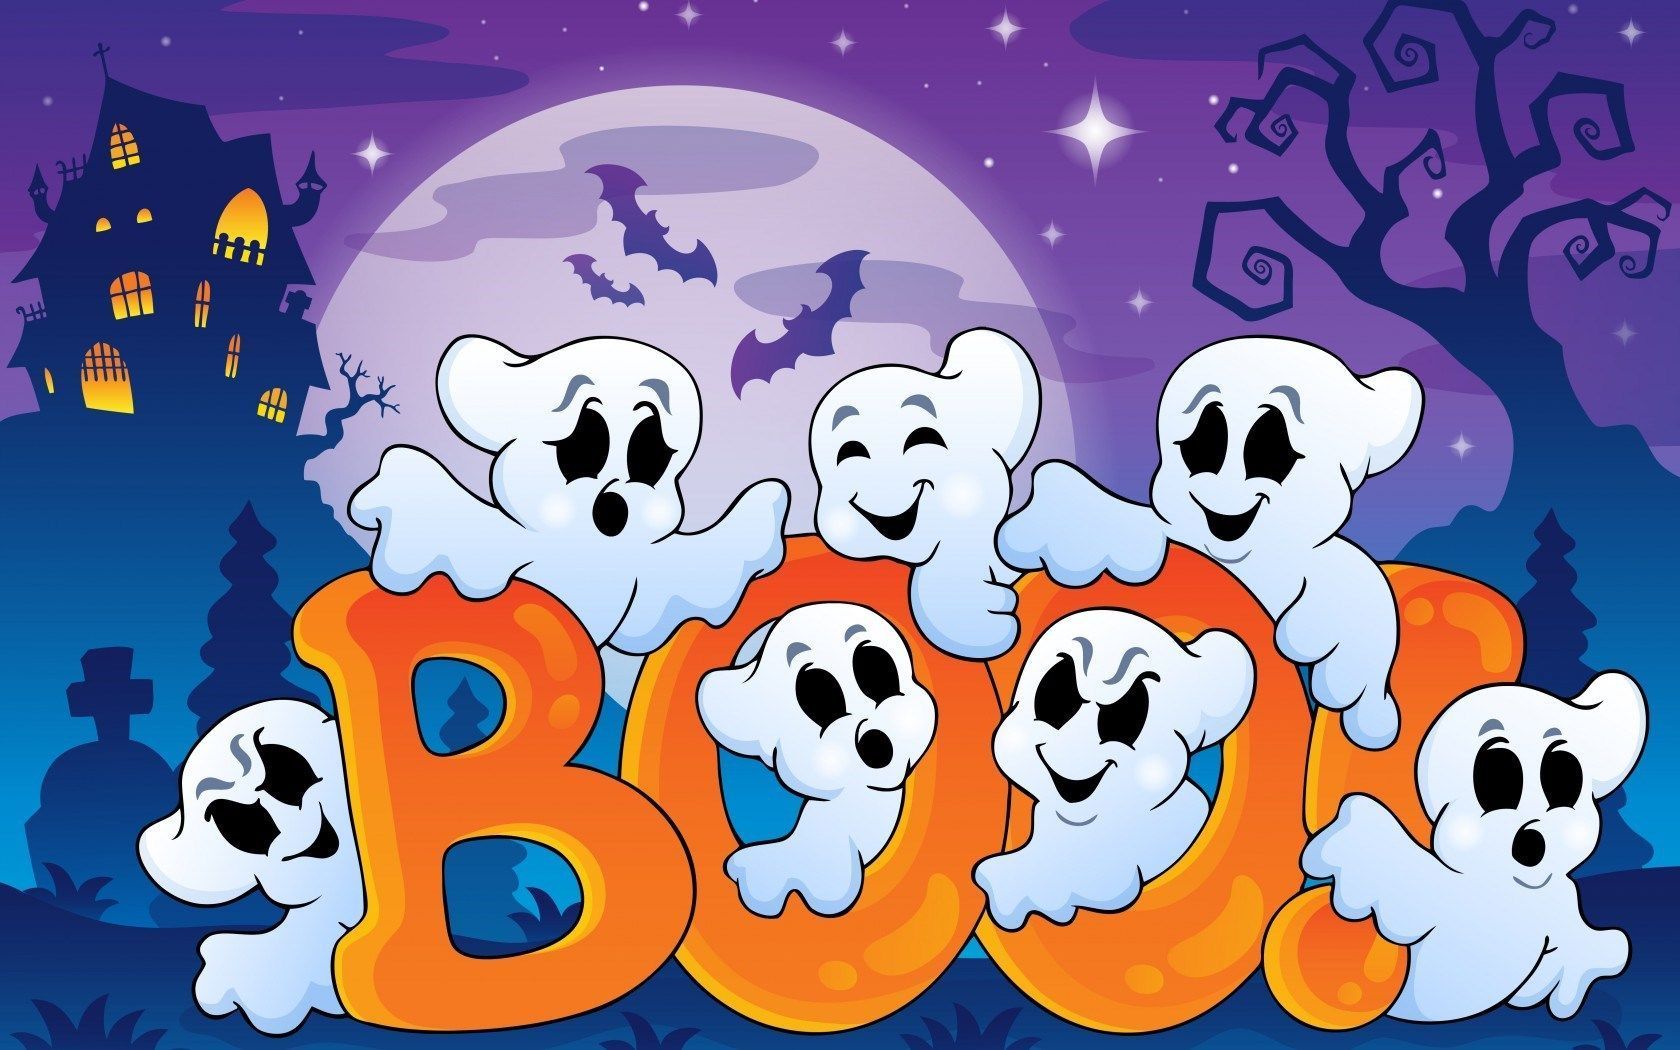 Cute Cartoon Happy Halloween Wallpaper & Background Beautiful Best Available For Download Cute Cartoon Happy Halloween Photo Free On Zicxa.com Image